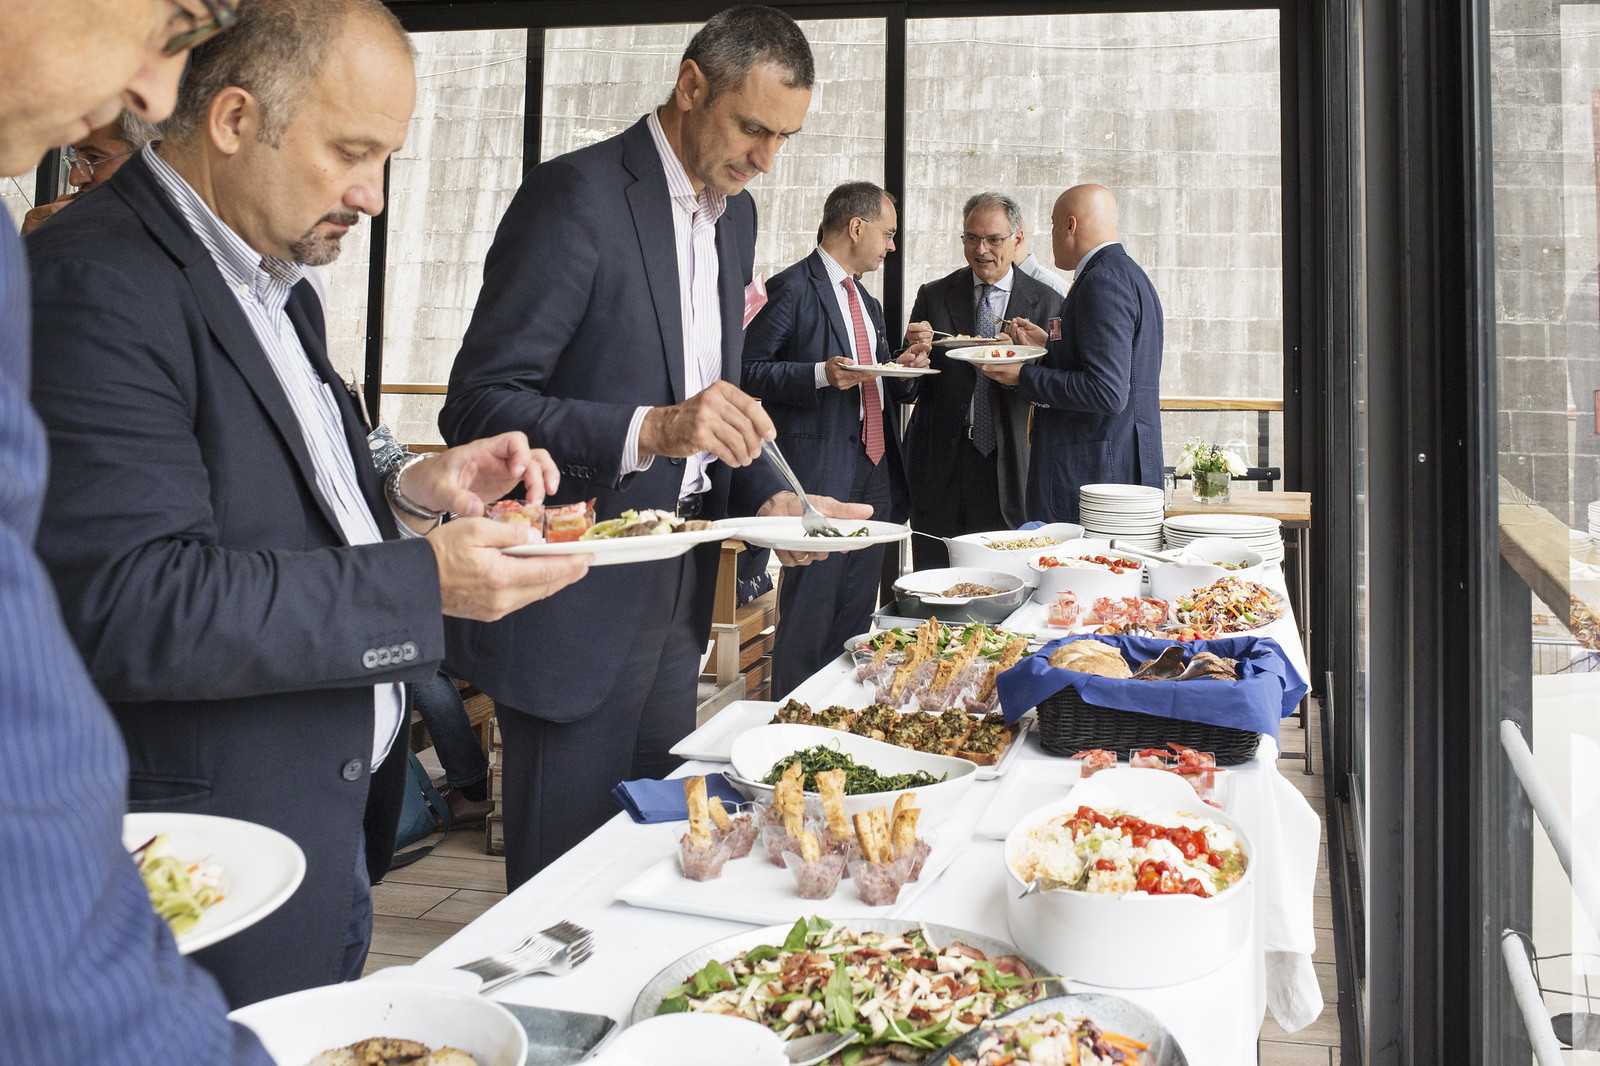 33 Networking Lunch